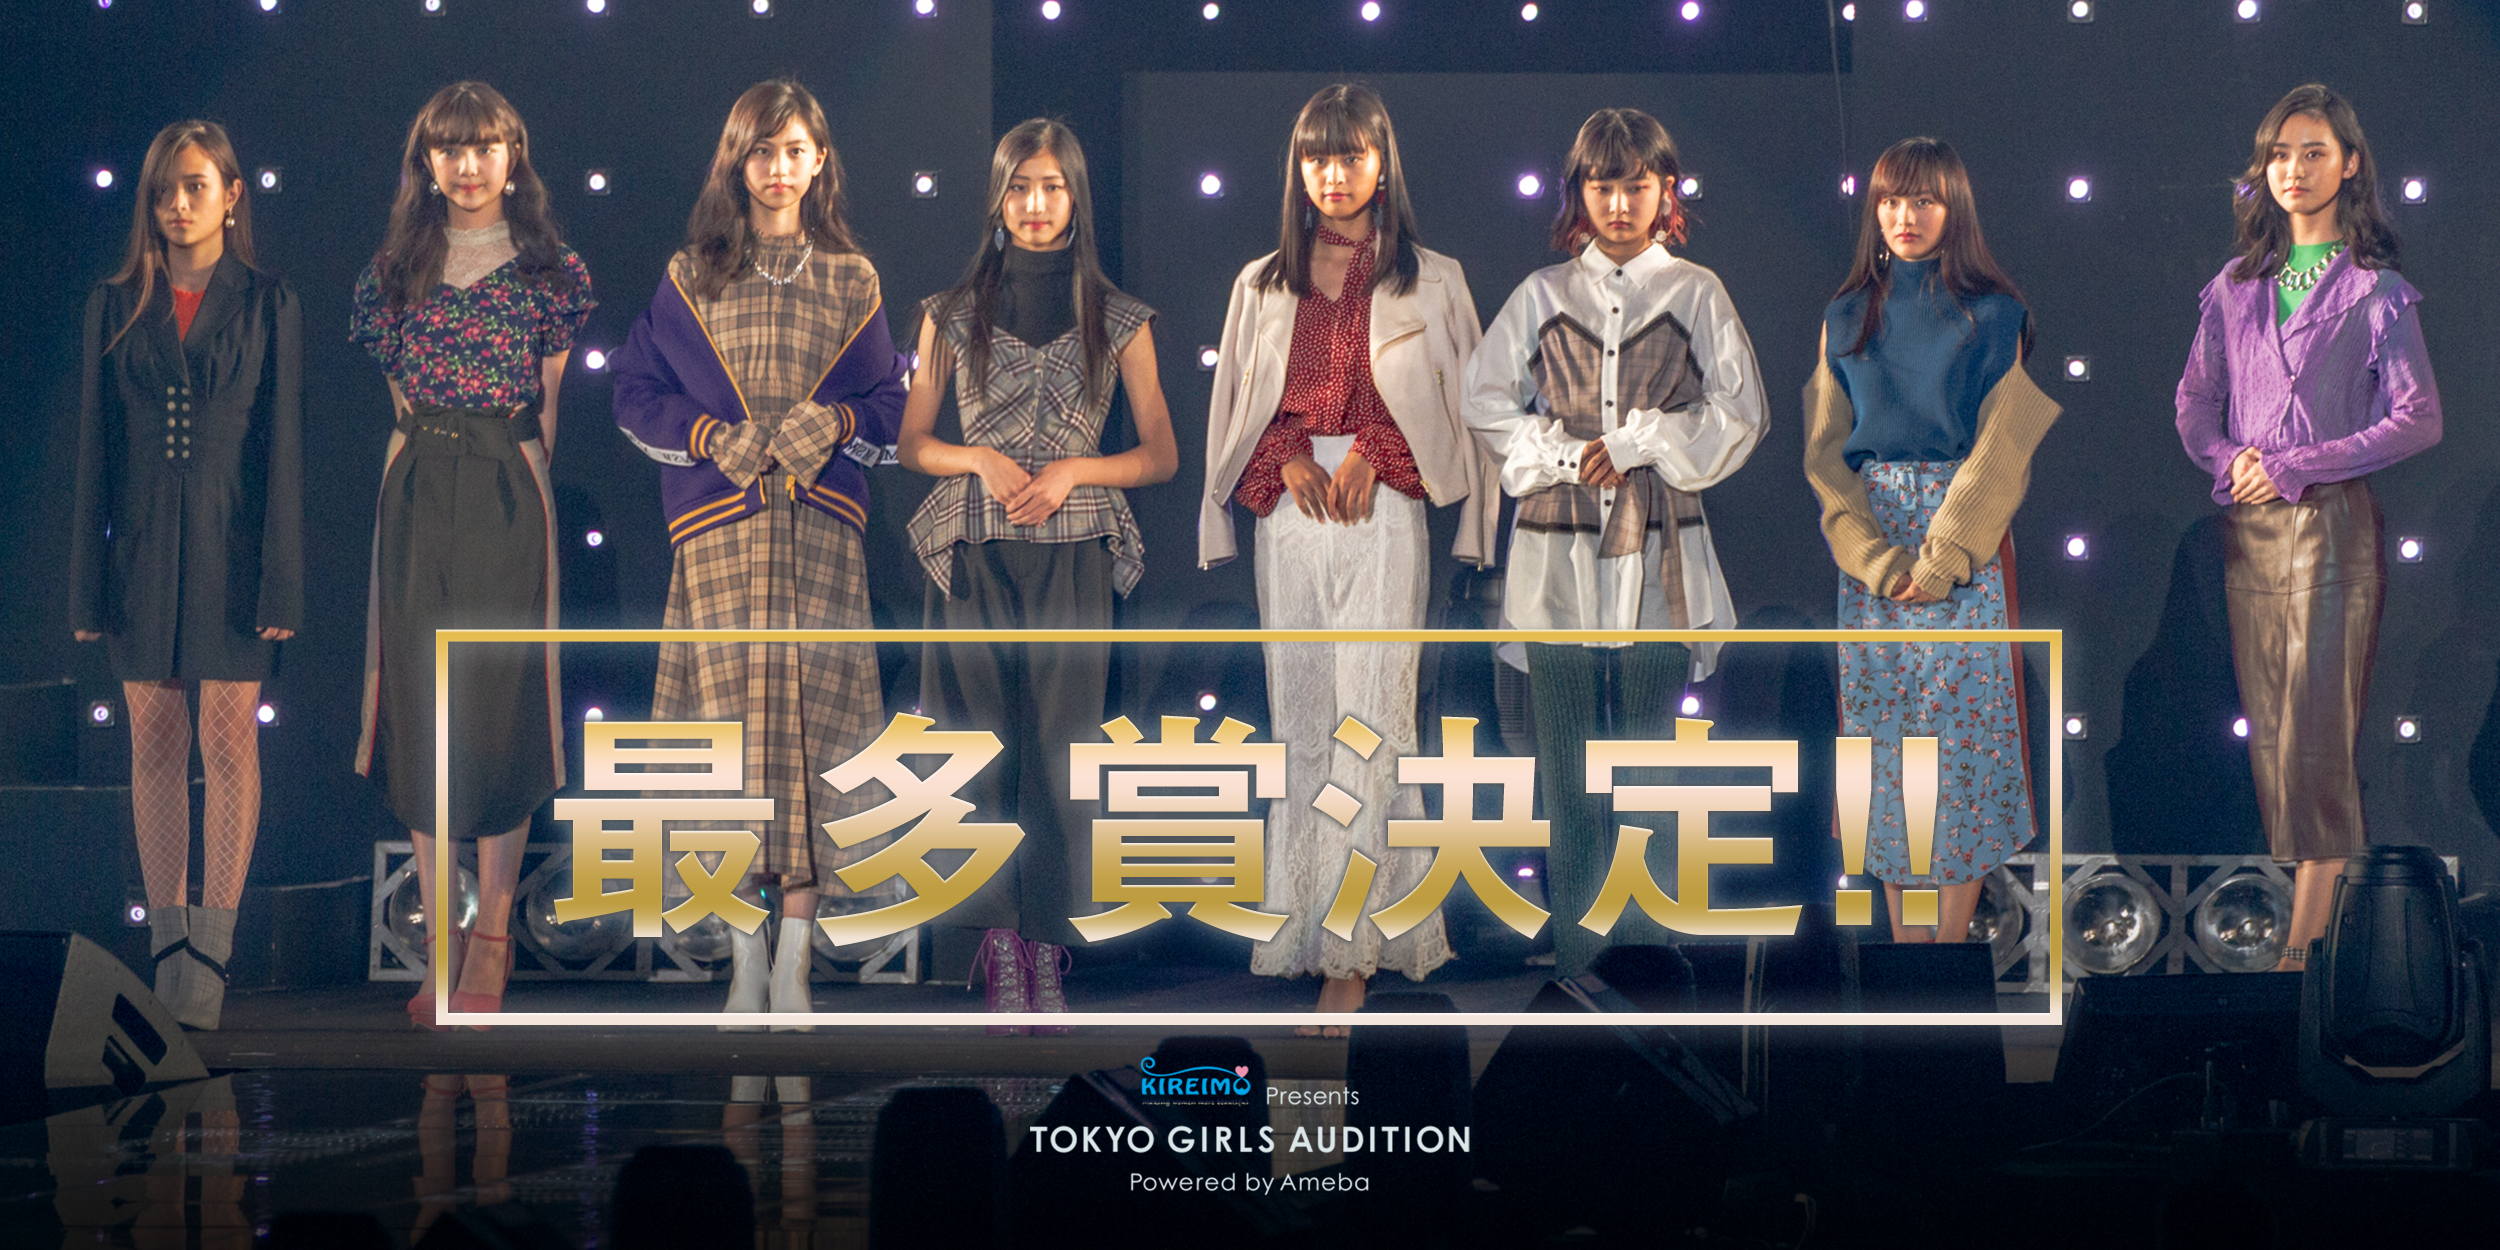 Tokyo Girls Audition Powered By Ameba